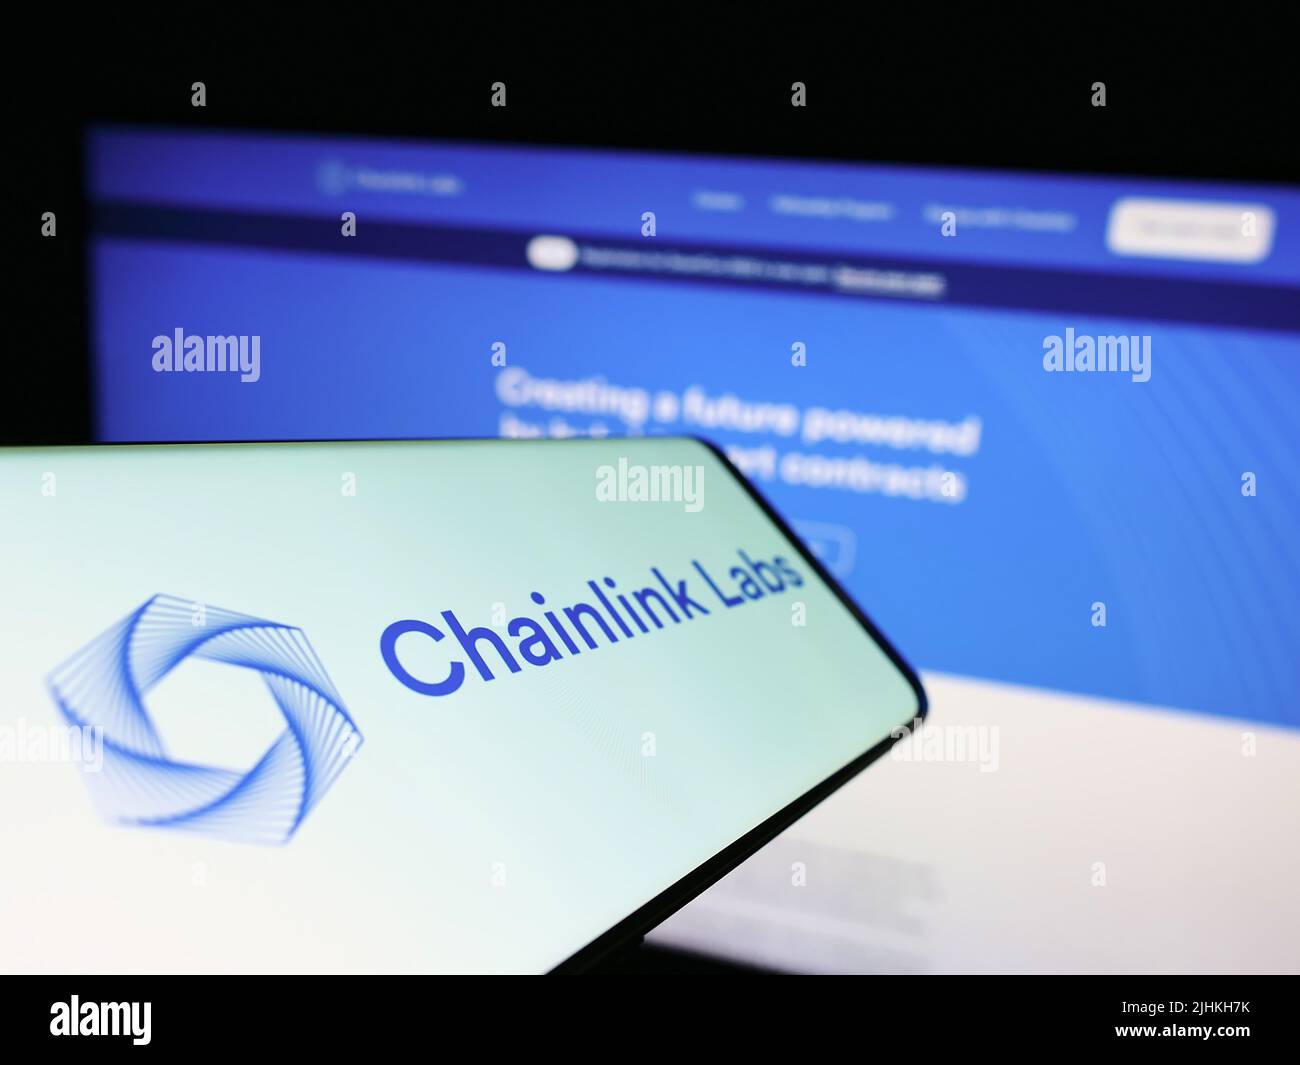 Mobile phone with logo of American blockchain company Chainlink Labs on screen in front of business website. Focus on center of phone display. Stock Photo